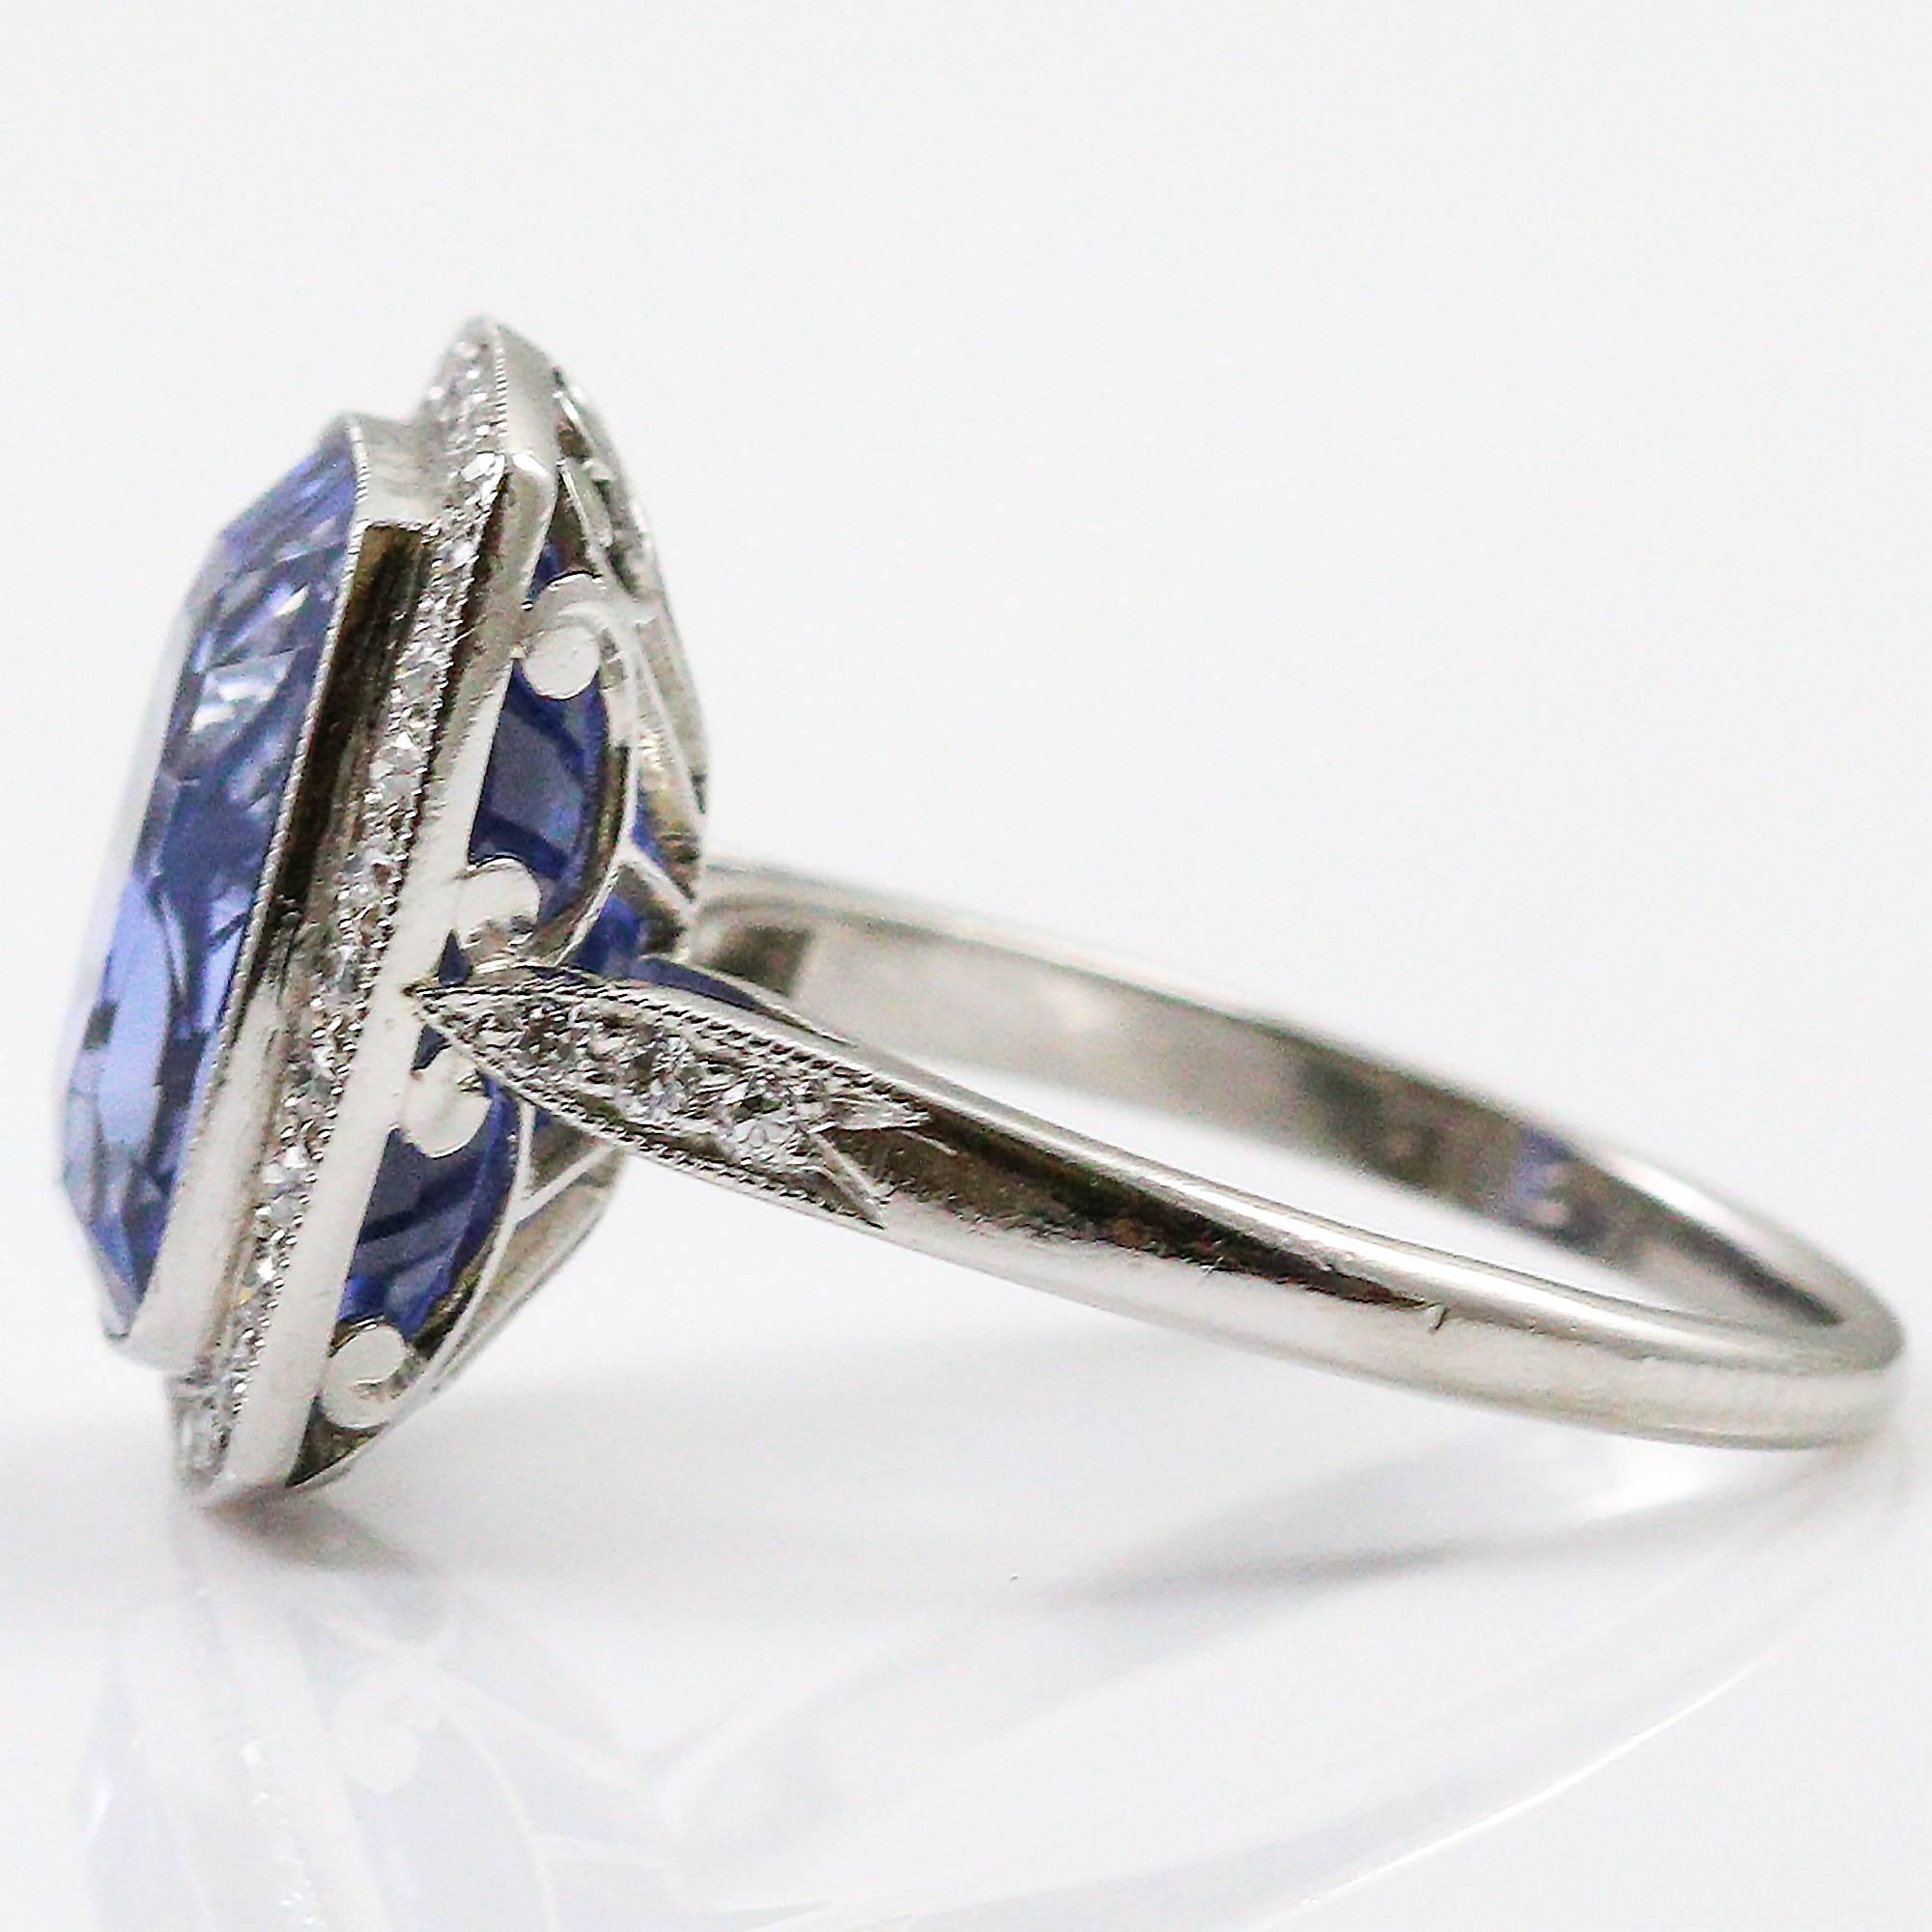 This jaw dropping cushion cut blue sapphire comes with an AGL report that indicates it comes from Ceylon and has no heat treatment. The giant cushion cut sapphire is bezel set in platinum and surrounded by a halo of 32 round brilliant cut diamonds